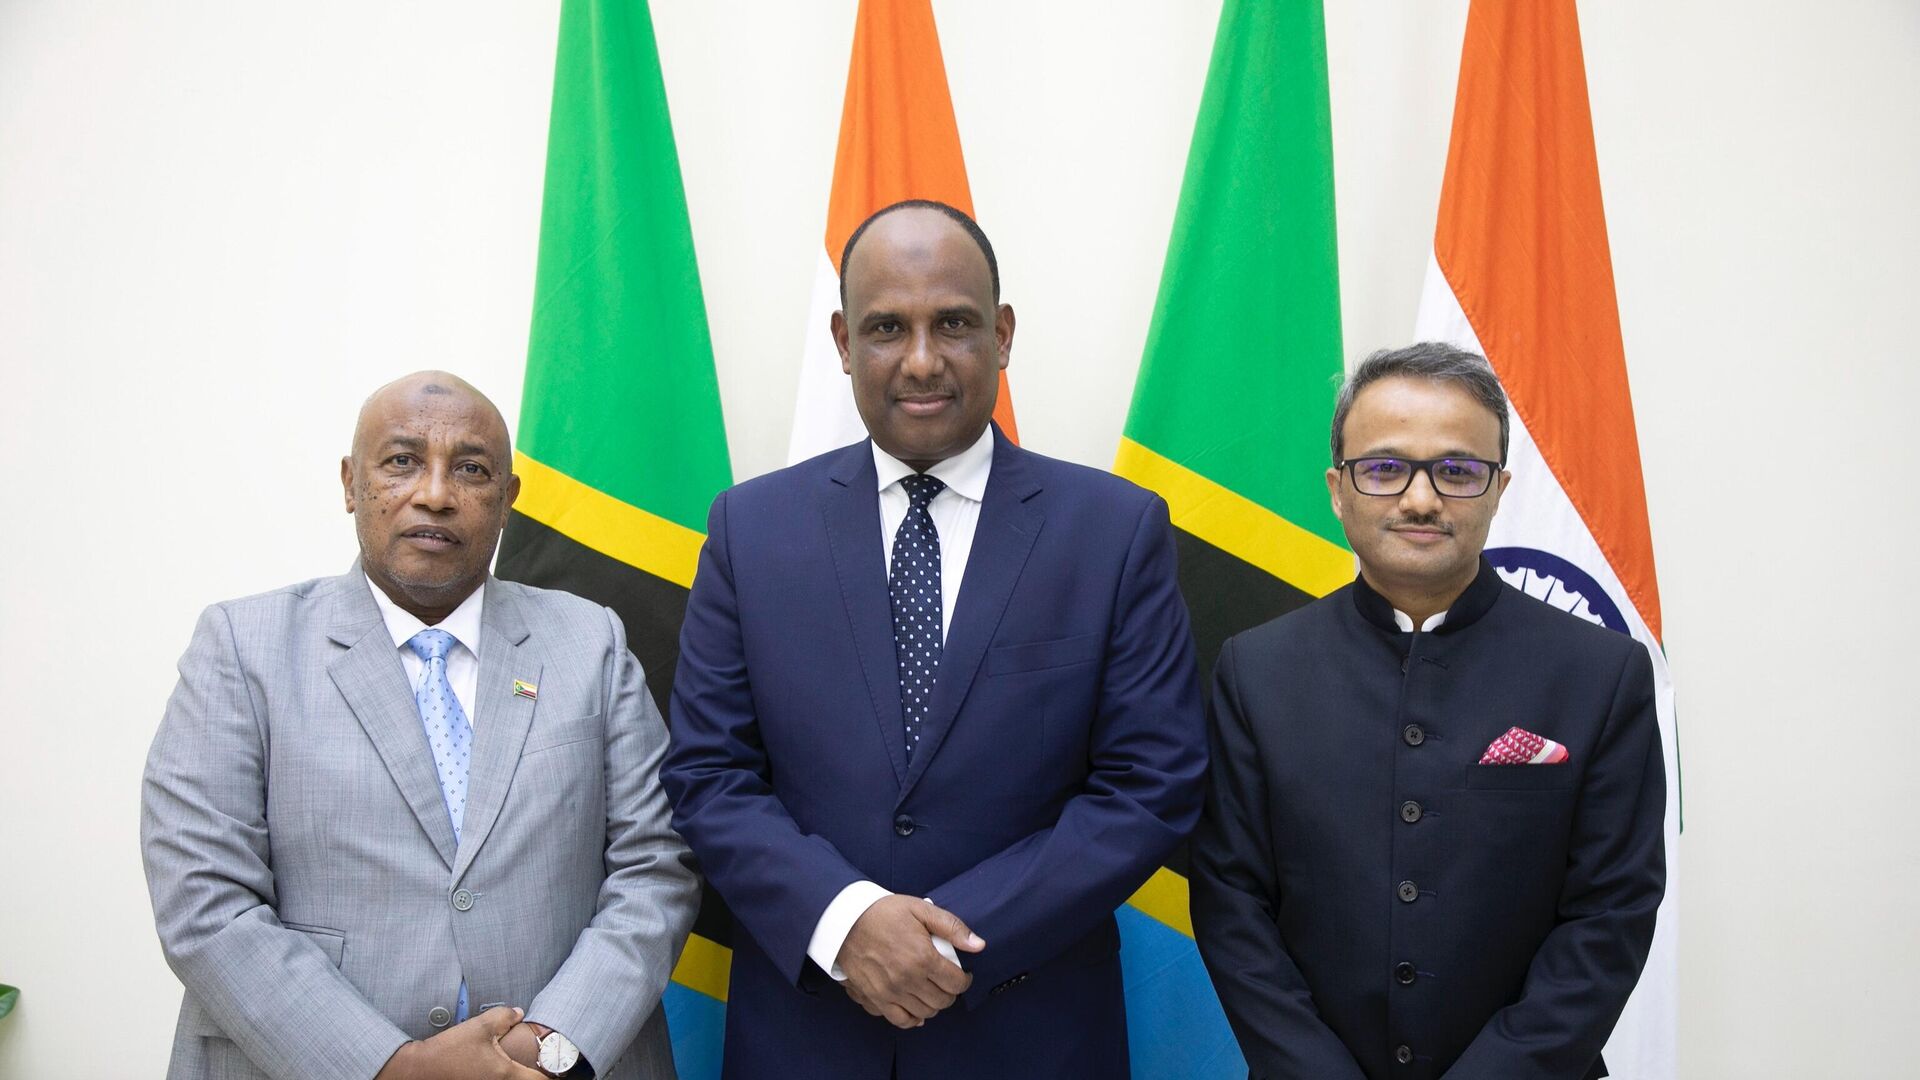 Deputy Minister for Tanzania's Foreign Ministry, Hon. Amb. Mbarouk Nassor Mbarouk reaffirms Tanzania’s commitment for cooperating closely with India for the mutual benefit of two countries. - Sputnik India, 1920, 30.01.2023